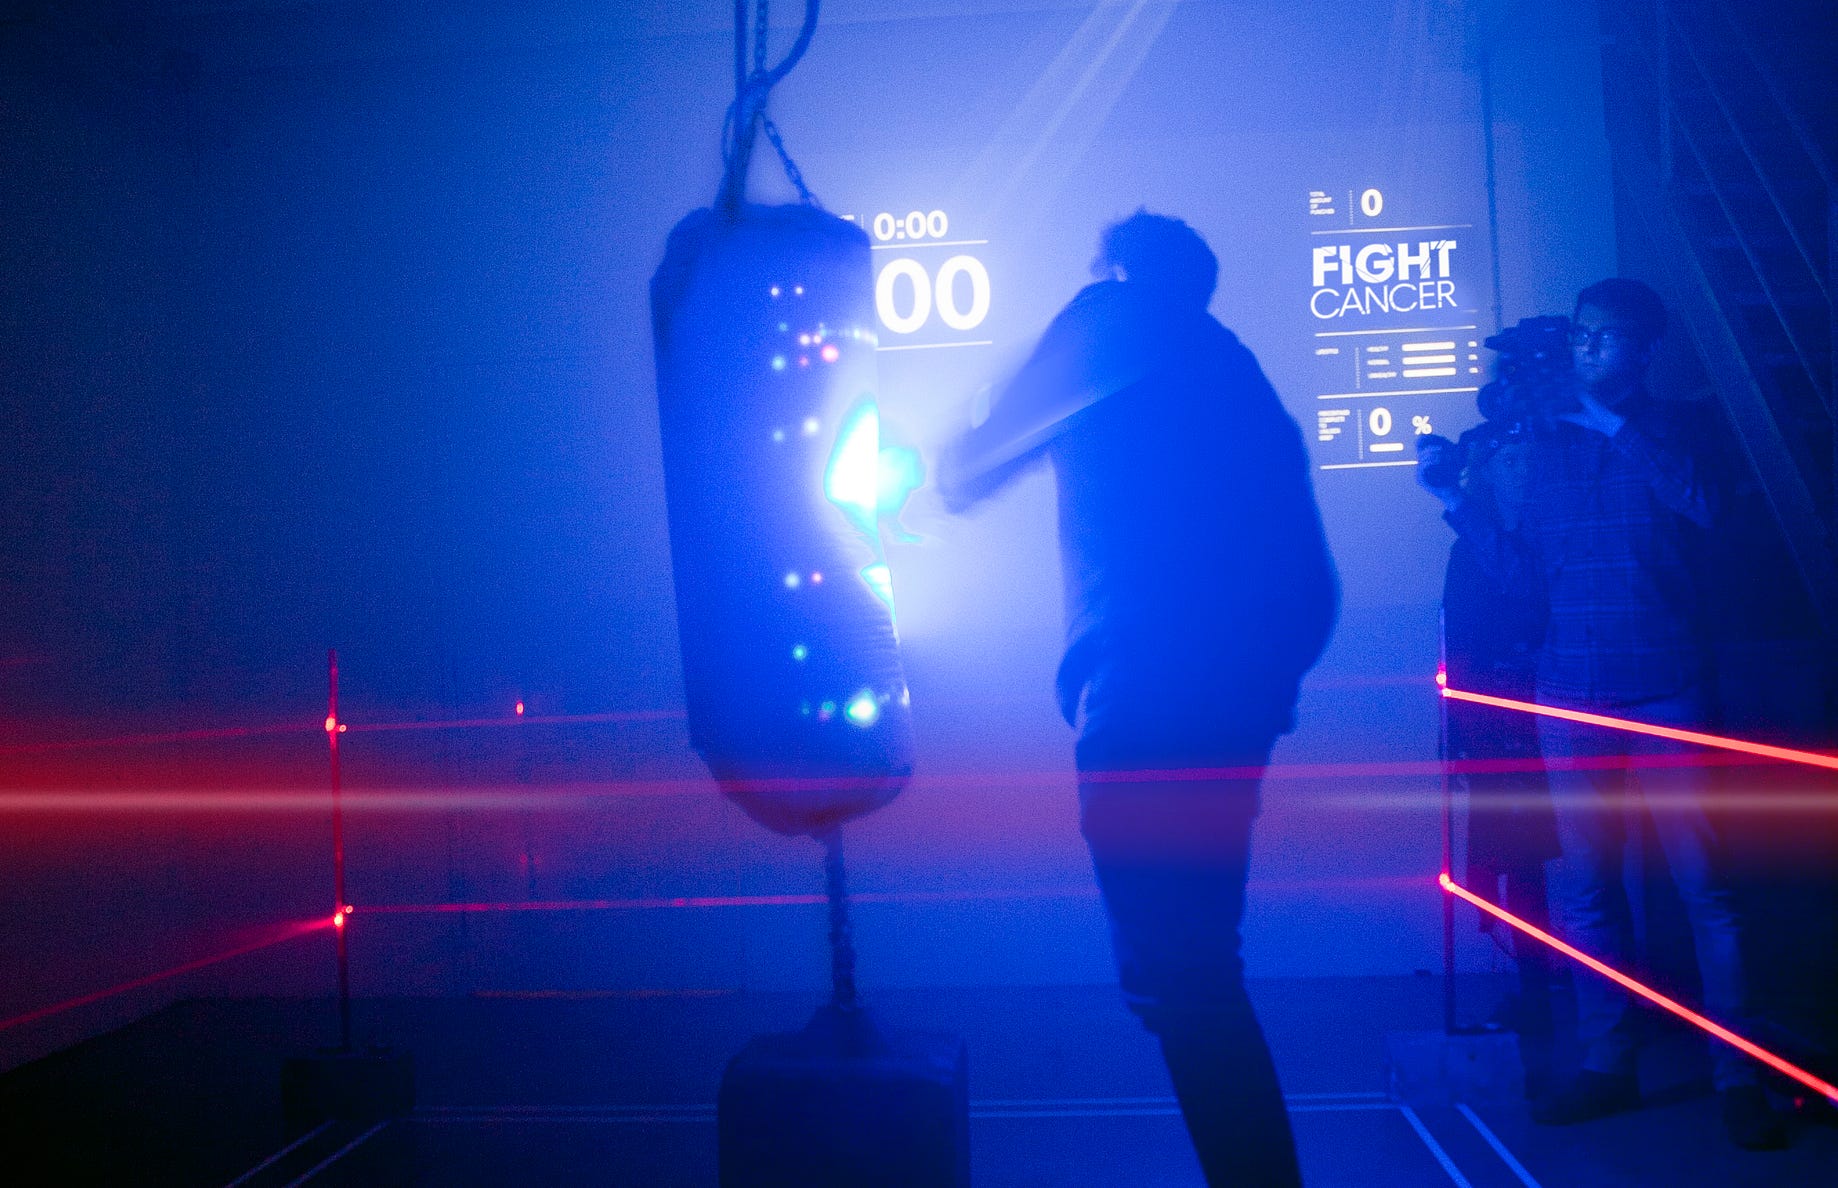 Interactive Punching Bag: installation generates donations for cancer  research | by Dutch Digital Design | Medium